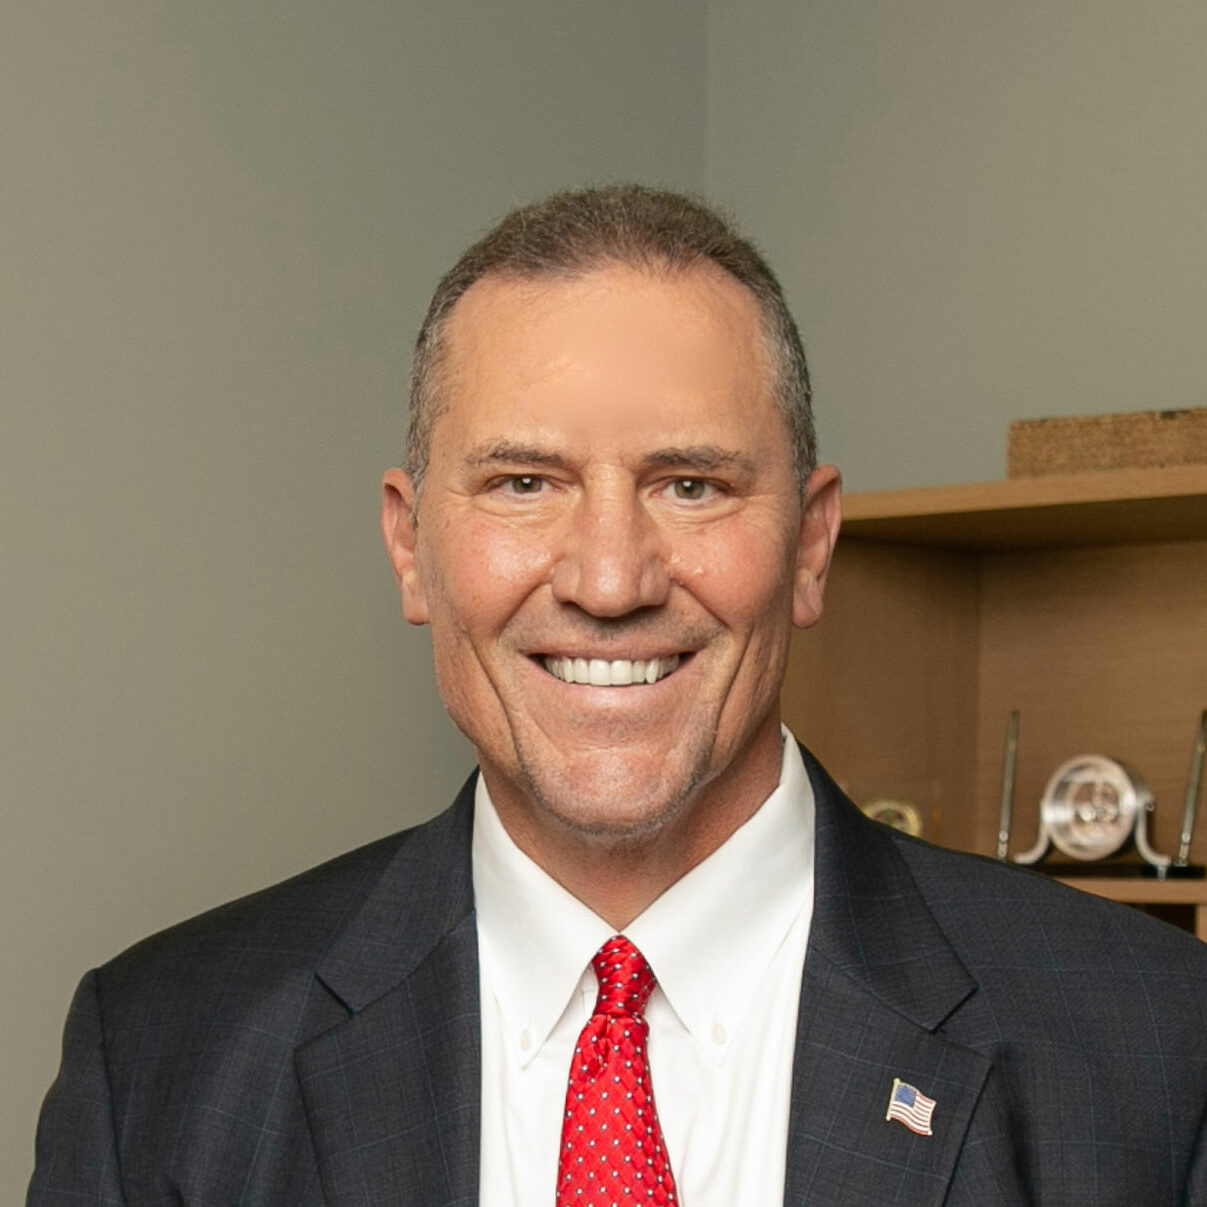 executive man with suit and red tie poses for a headshot in his office